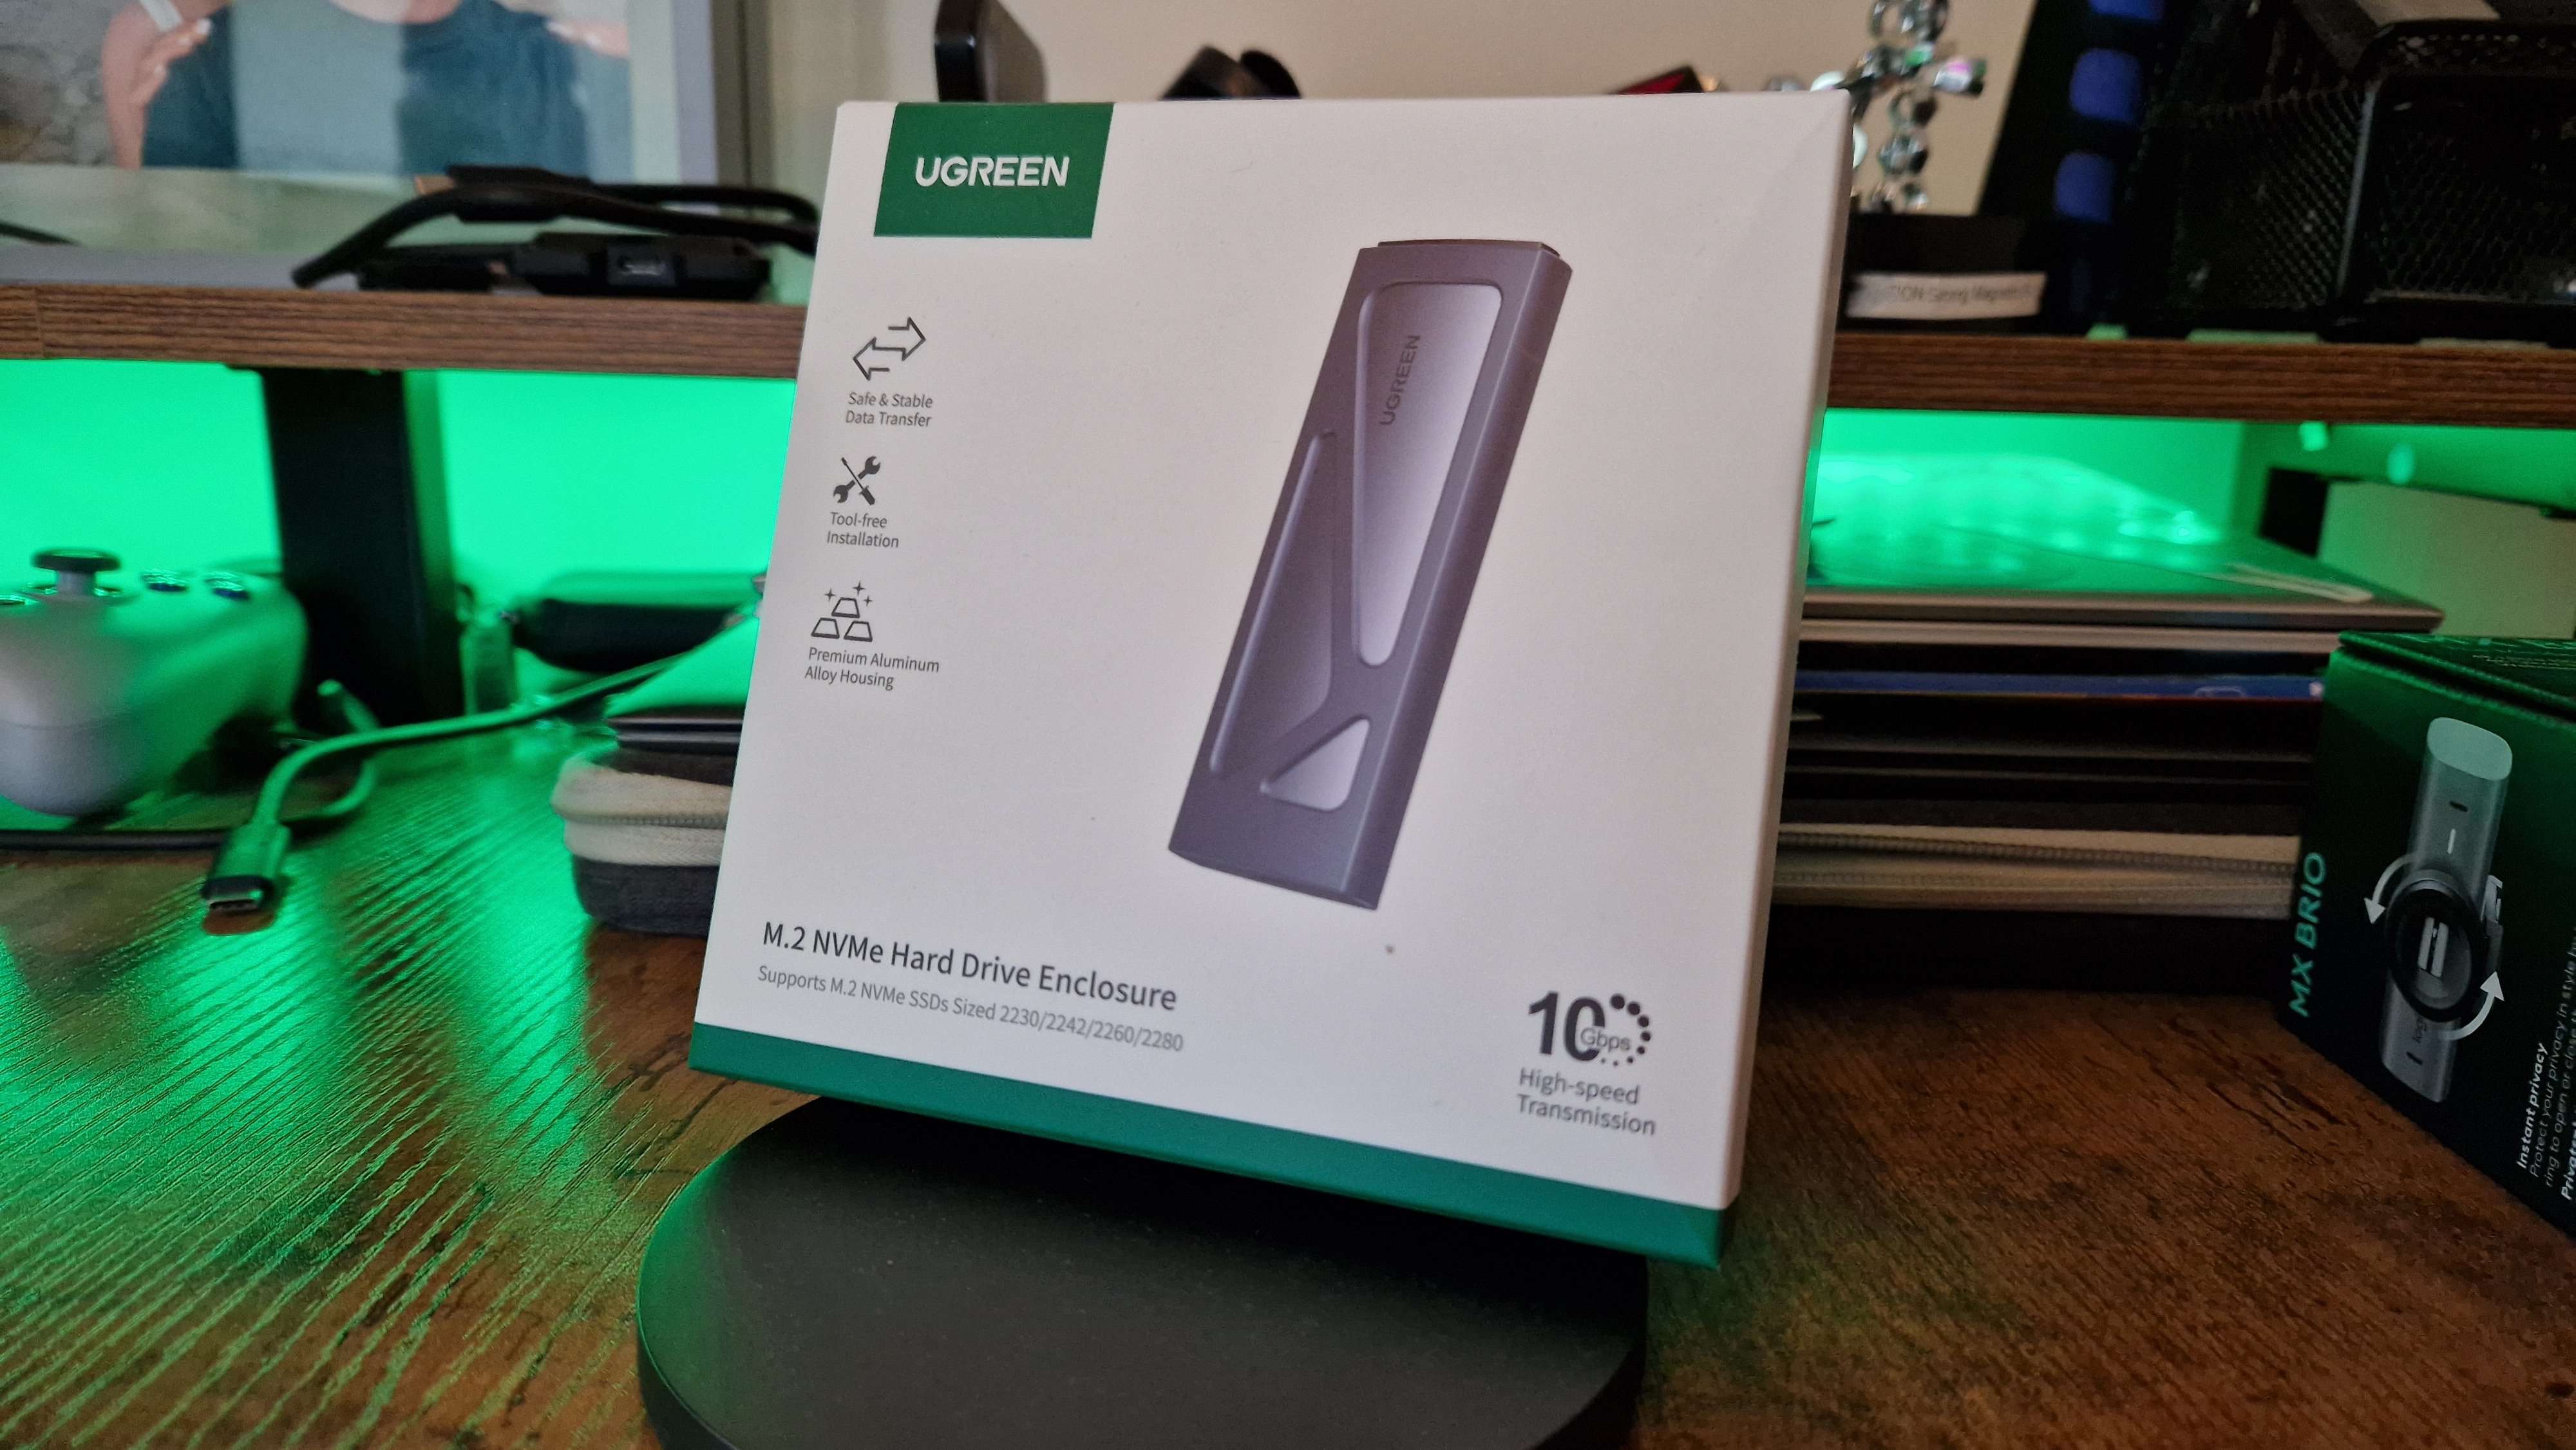 Ugreen's NVMe SSD enclosure in front of some green RGB lighting